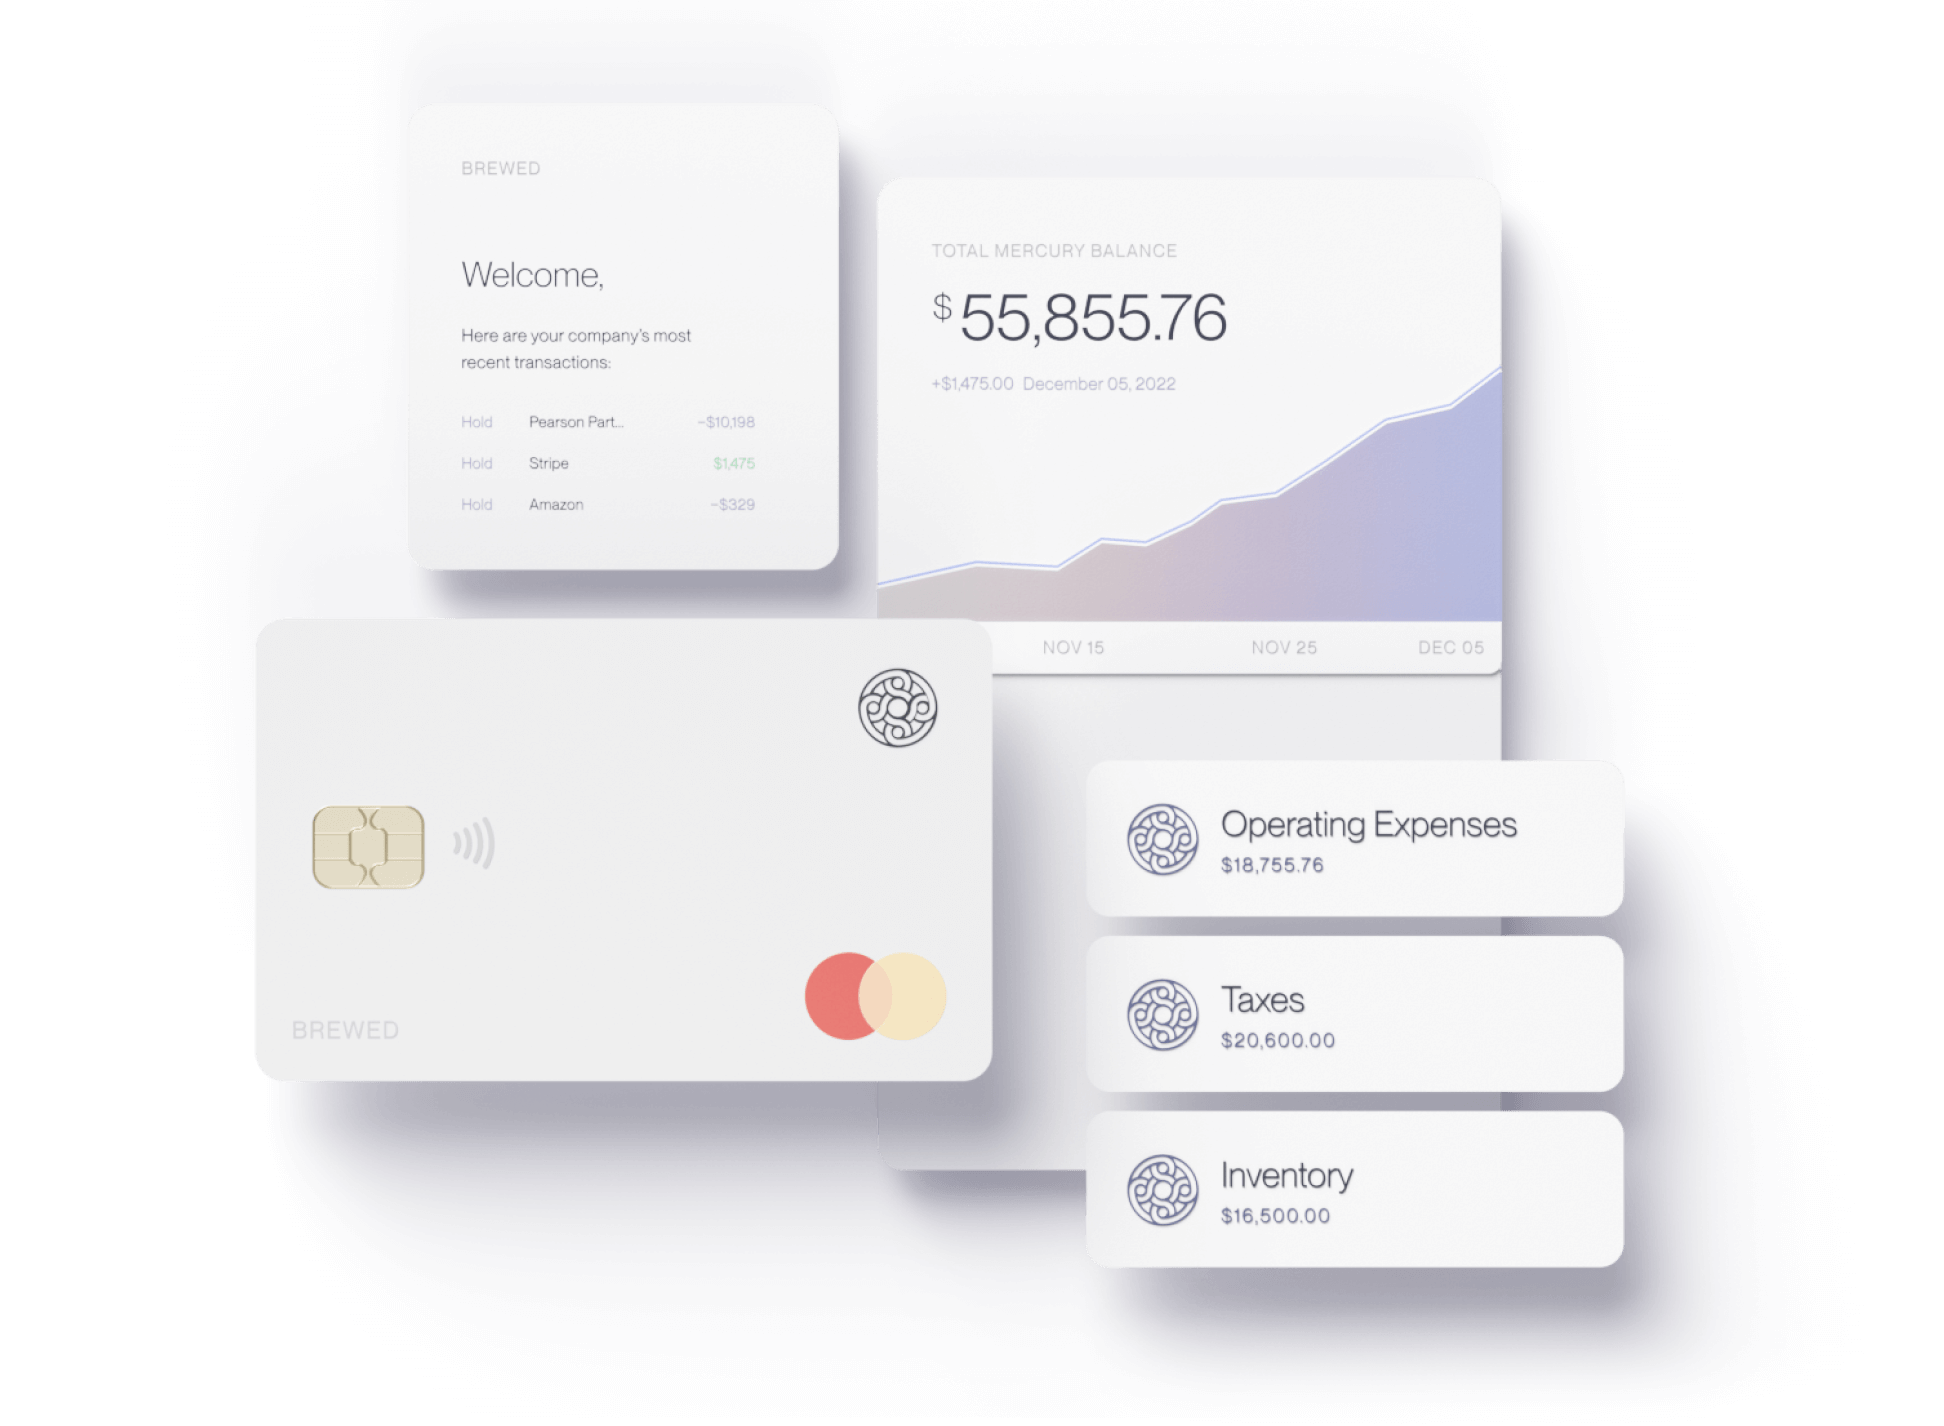 Snapshots of all your essential ecommerce banking tools- debit card, account balance and transaction history